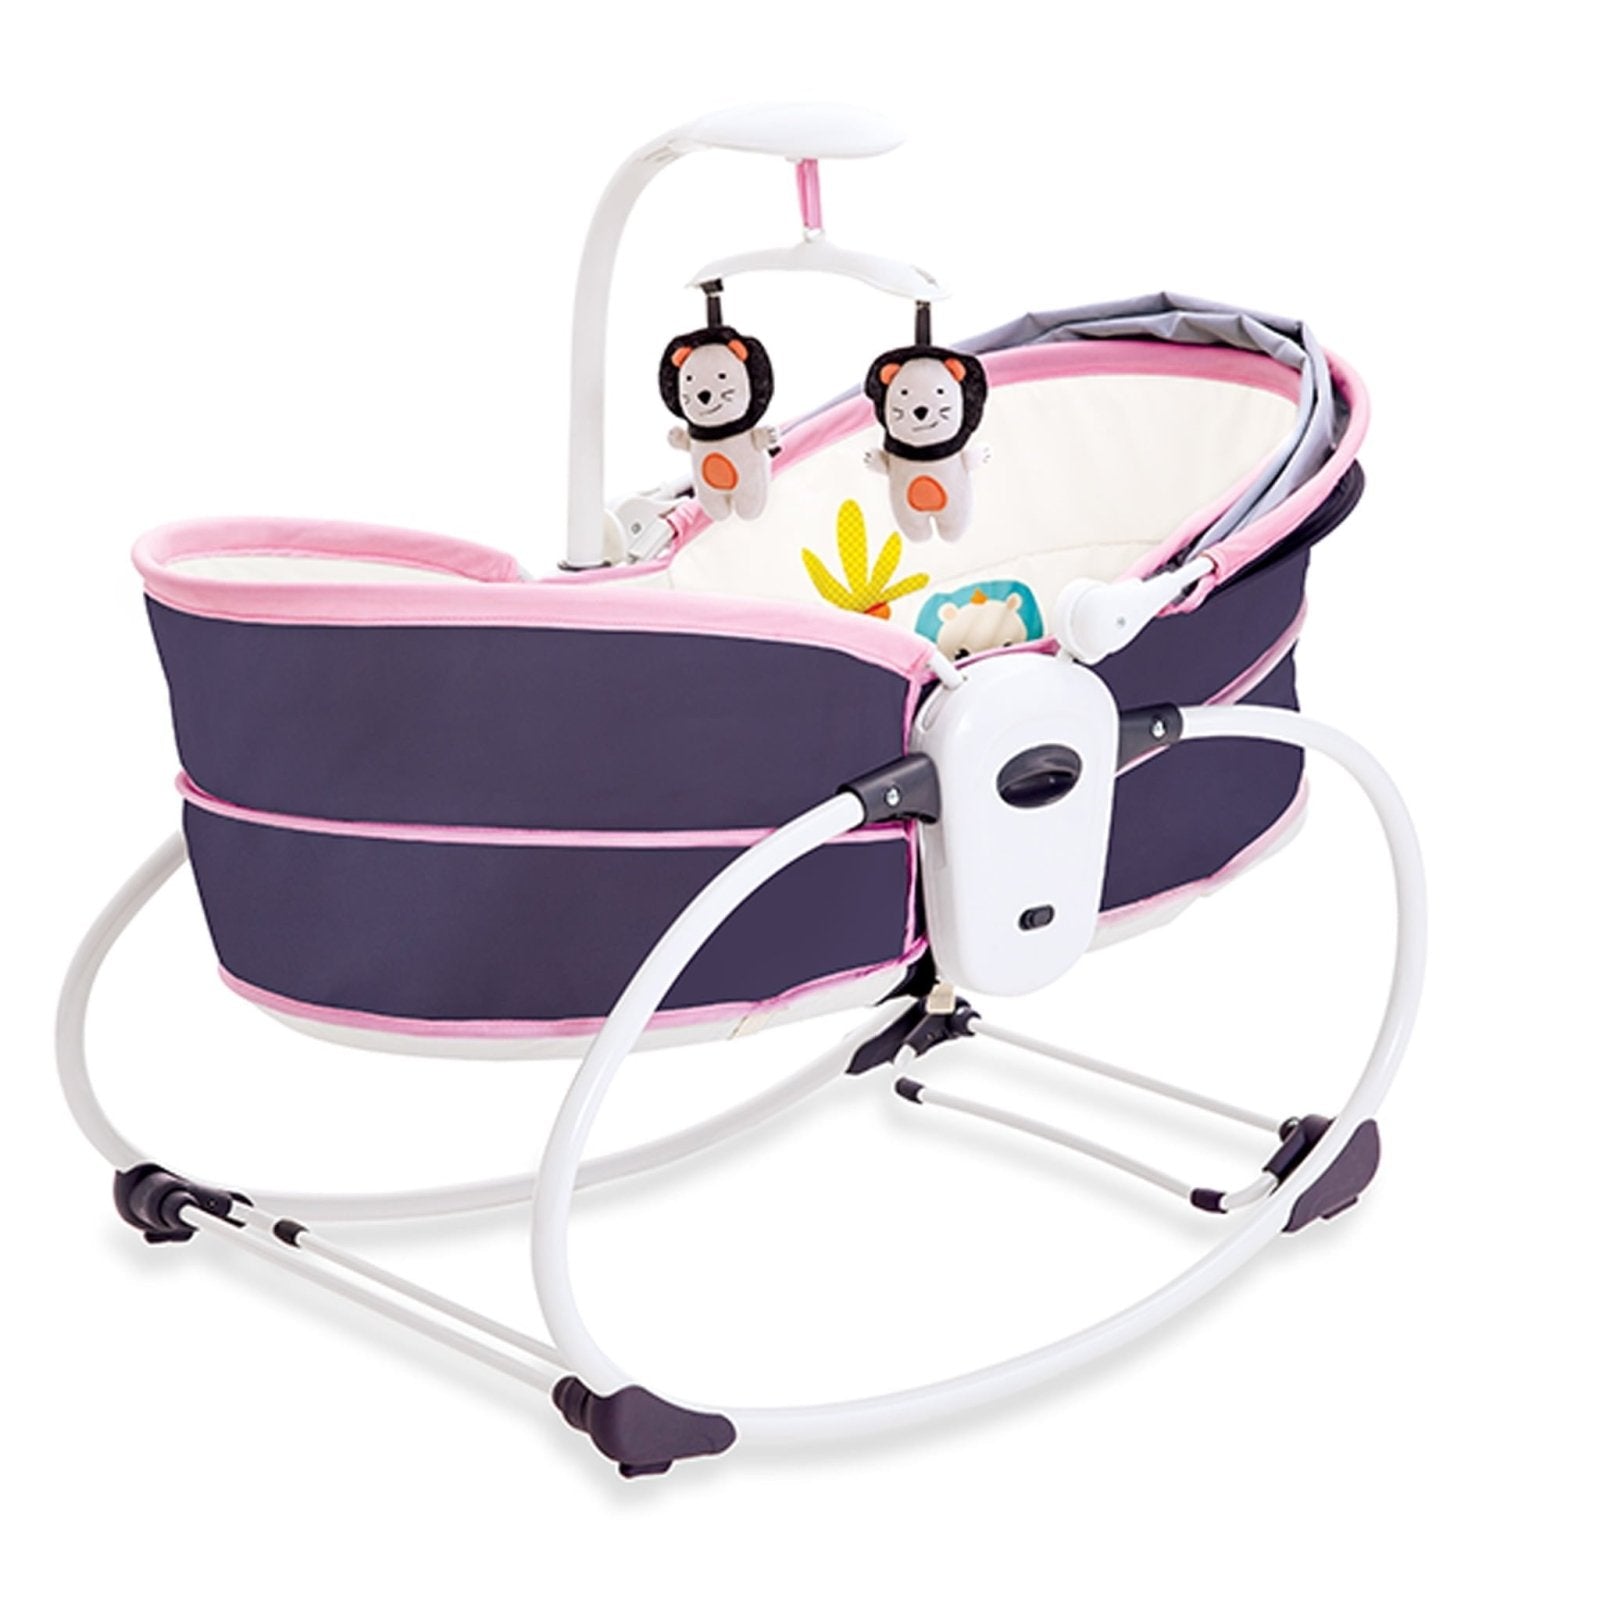 5 in 1 Rocker and Bassinet Pink Color by Mastela